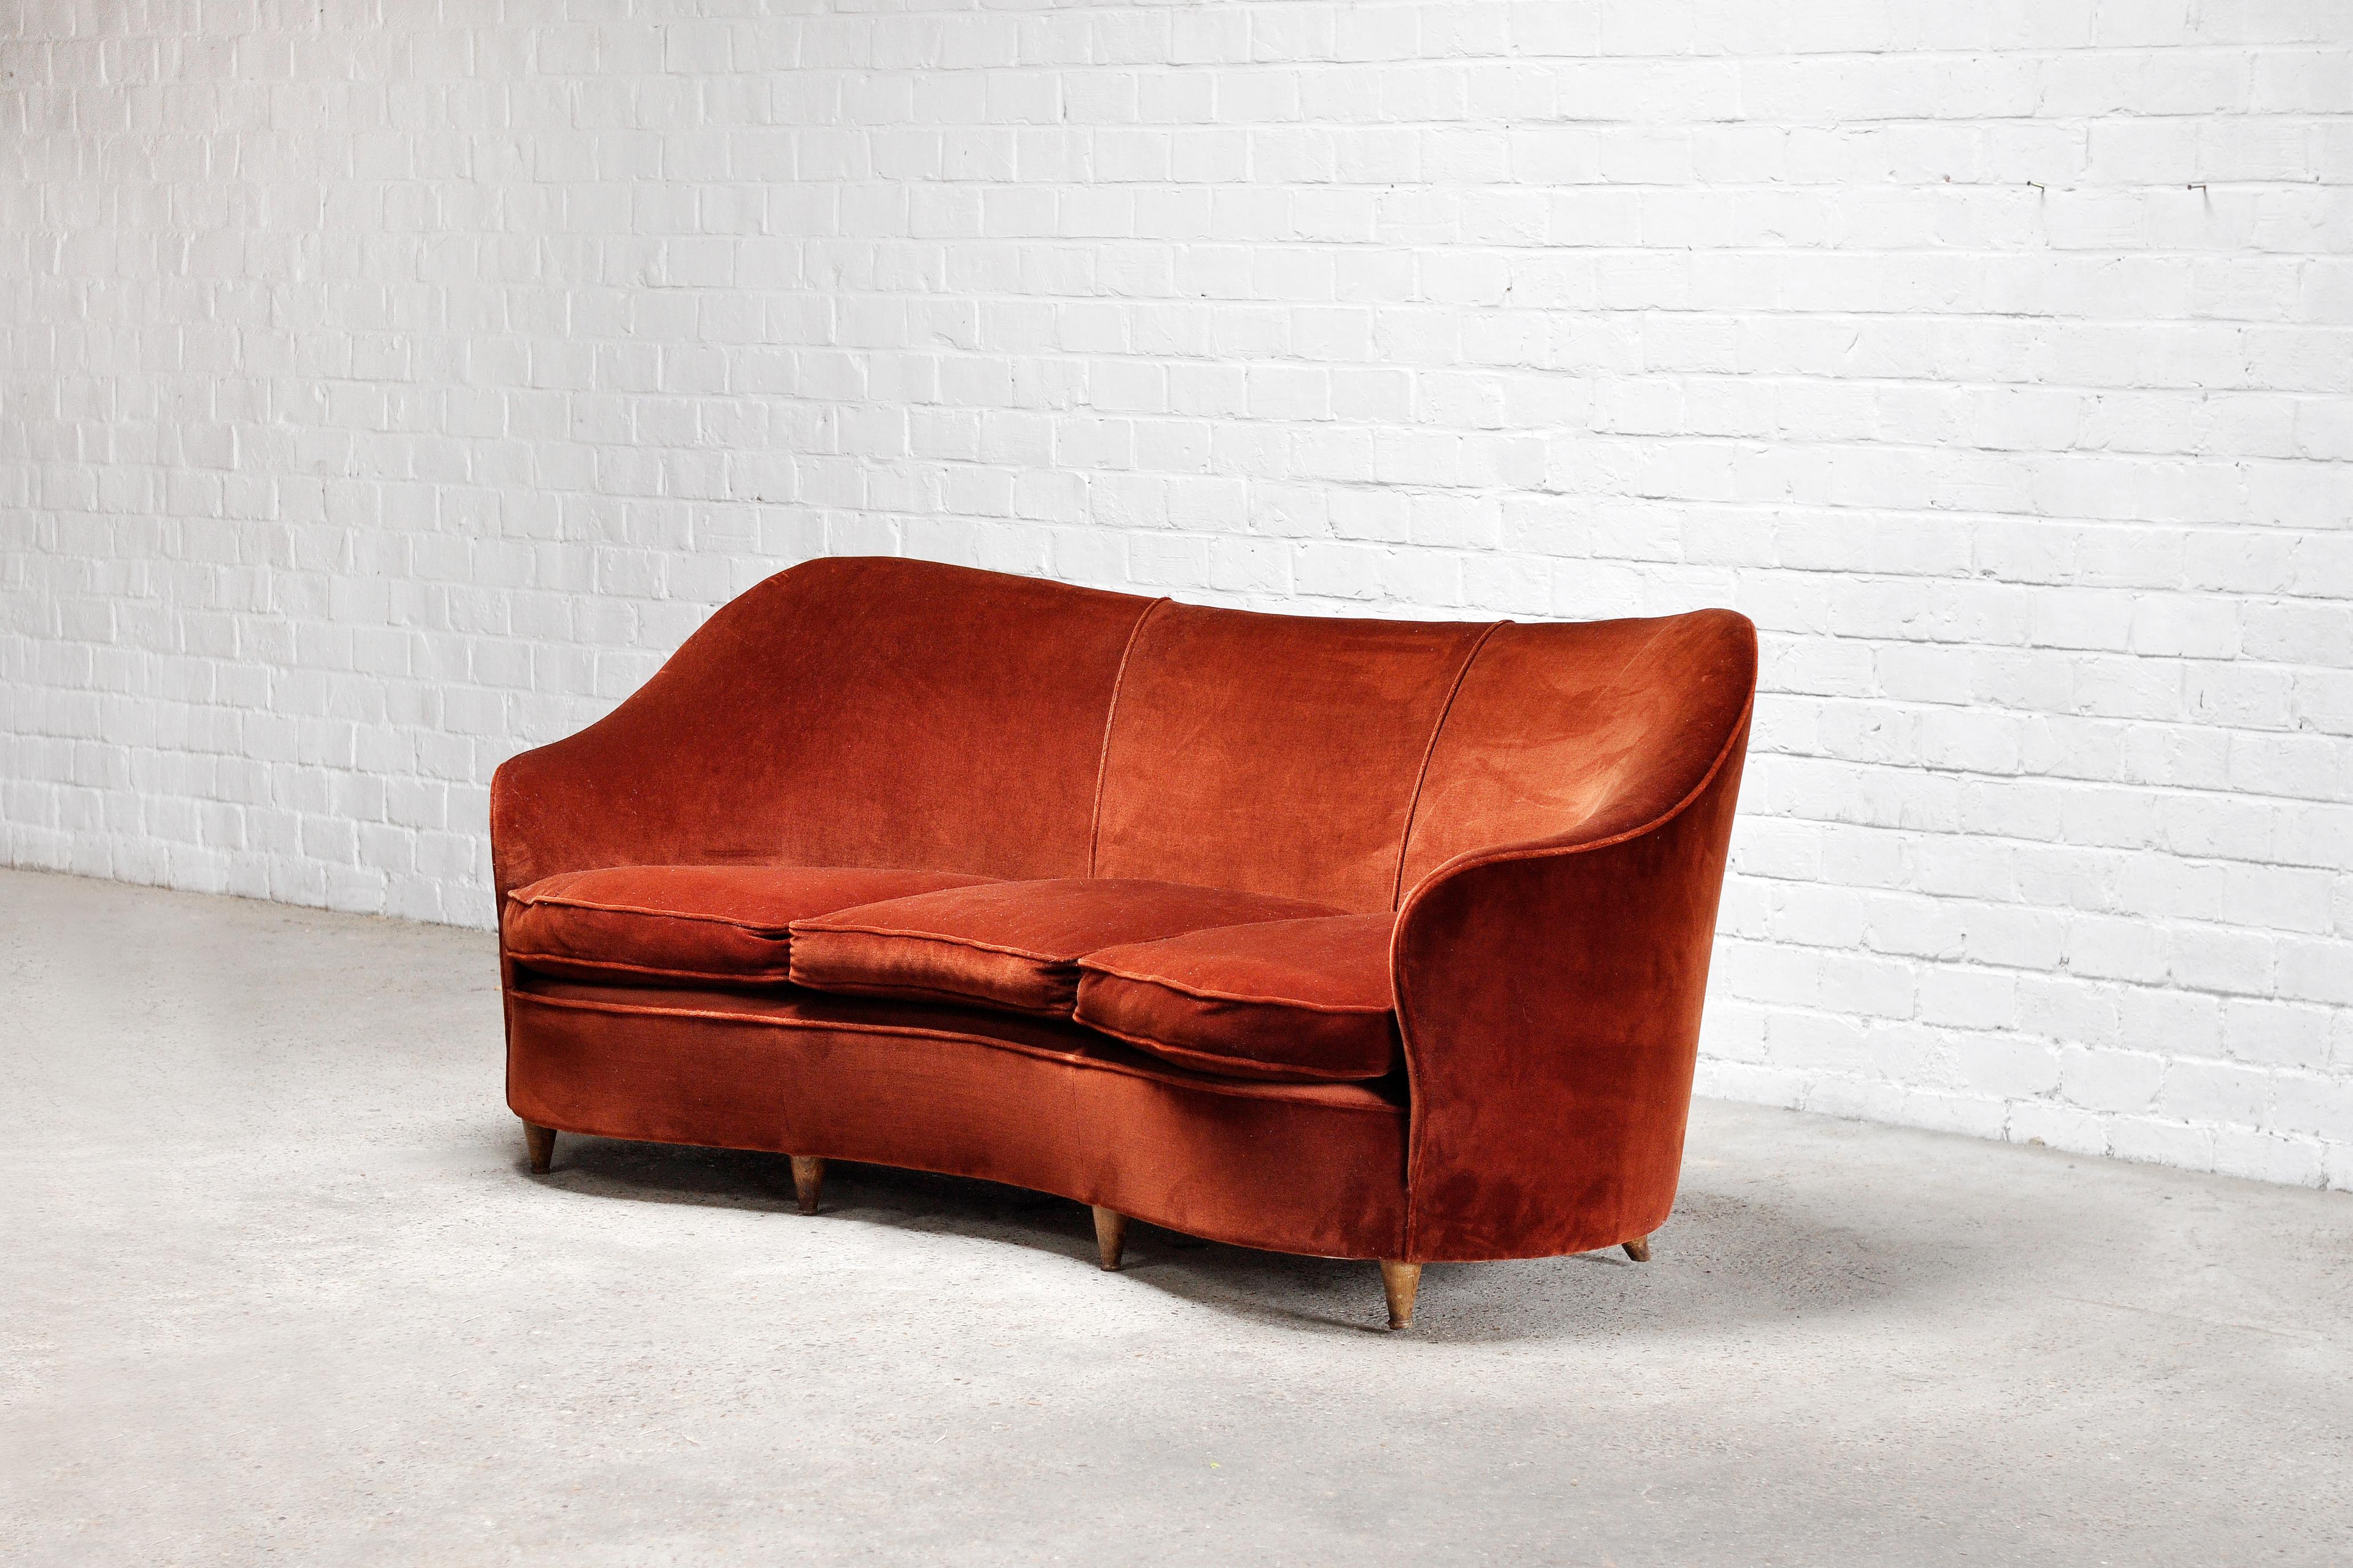 A beautiful curved 3-seater sofa designed by the architect and designer Melchiorre Bega in Milan, Italy 1950’s. The sofa features its original warm red/brown velvet upholstery and has conical feet made out of wood. Its organic shapes and lines